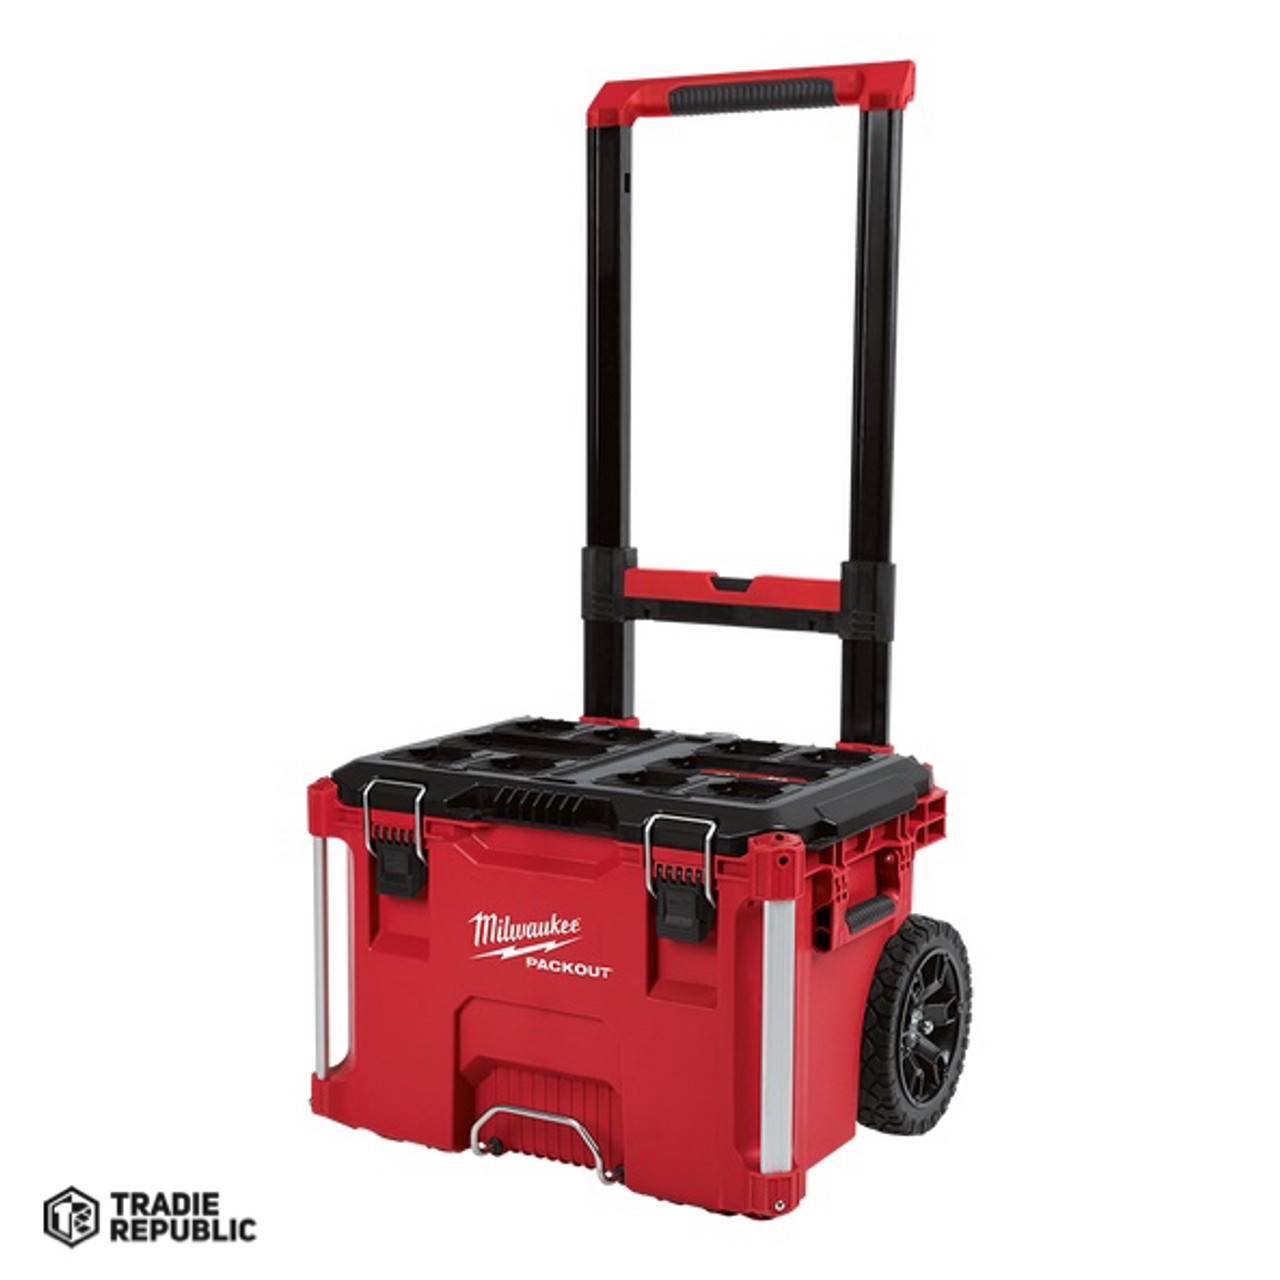 48228426 Milwaukee Packout Rolling Tool Box